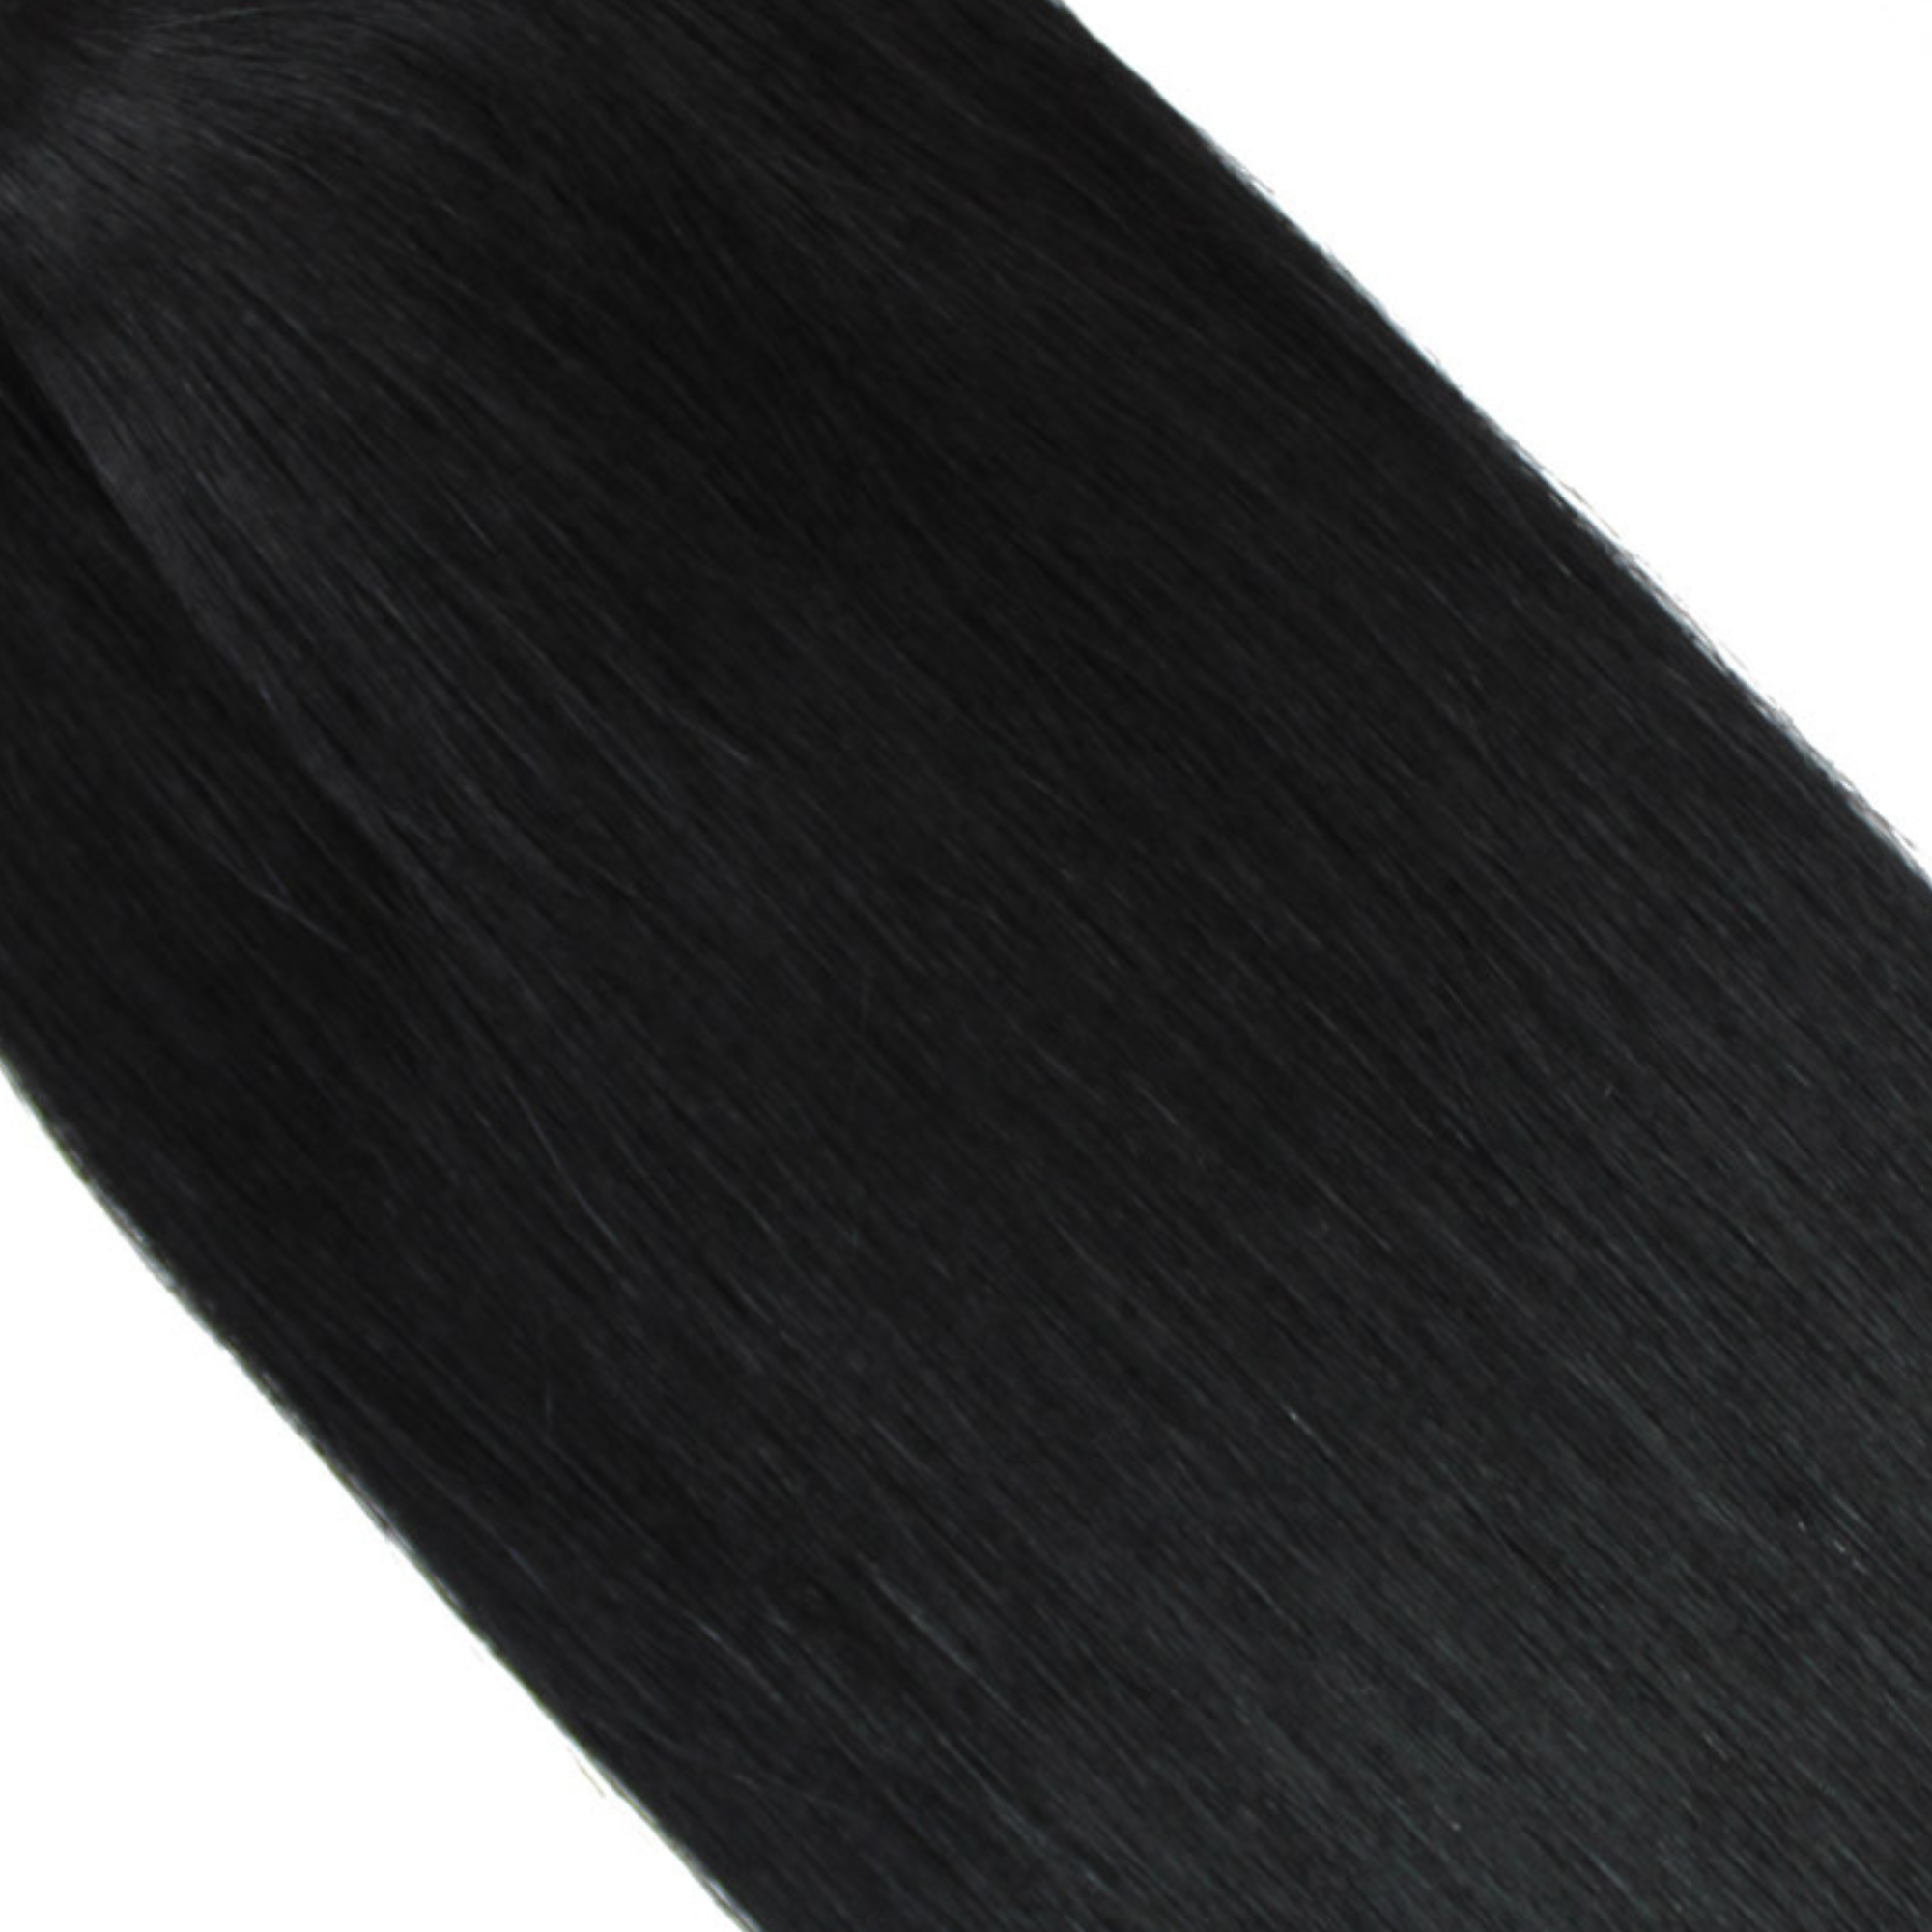 "hair rehab london 22" tape hair extensions shade swatch titled jet black"